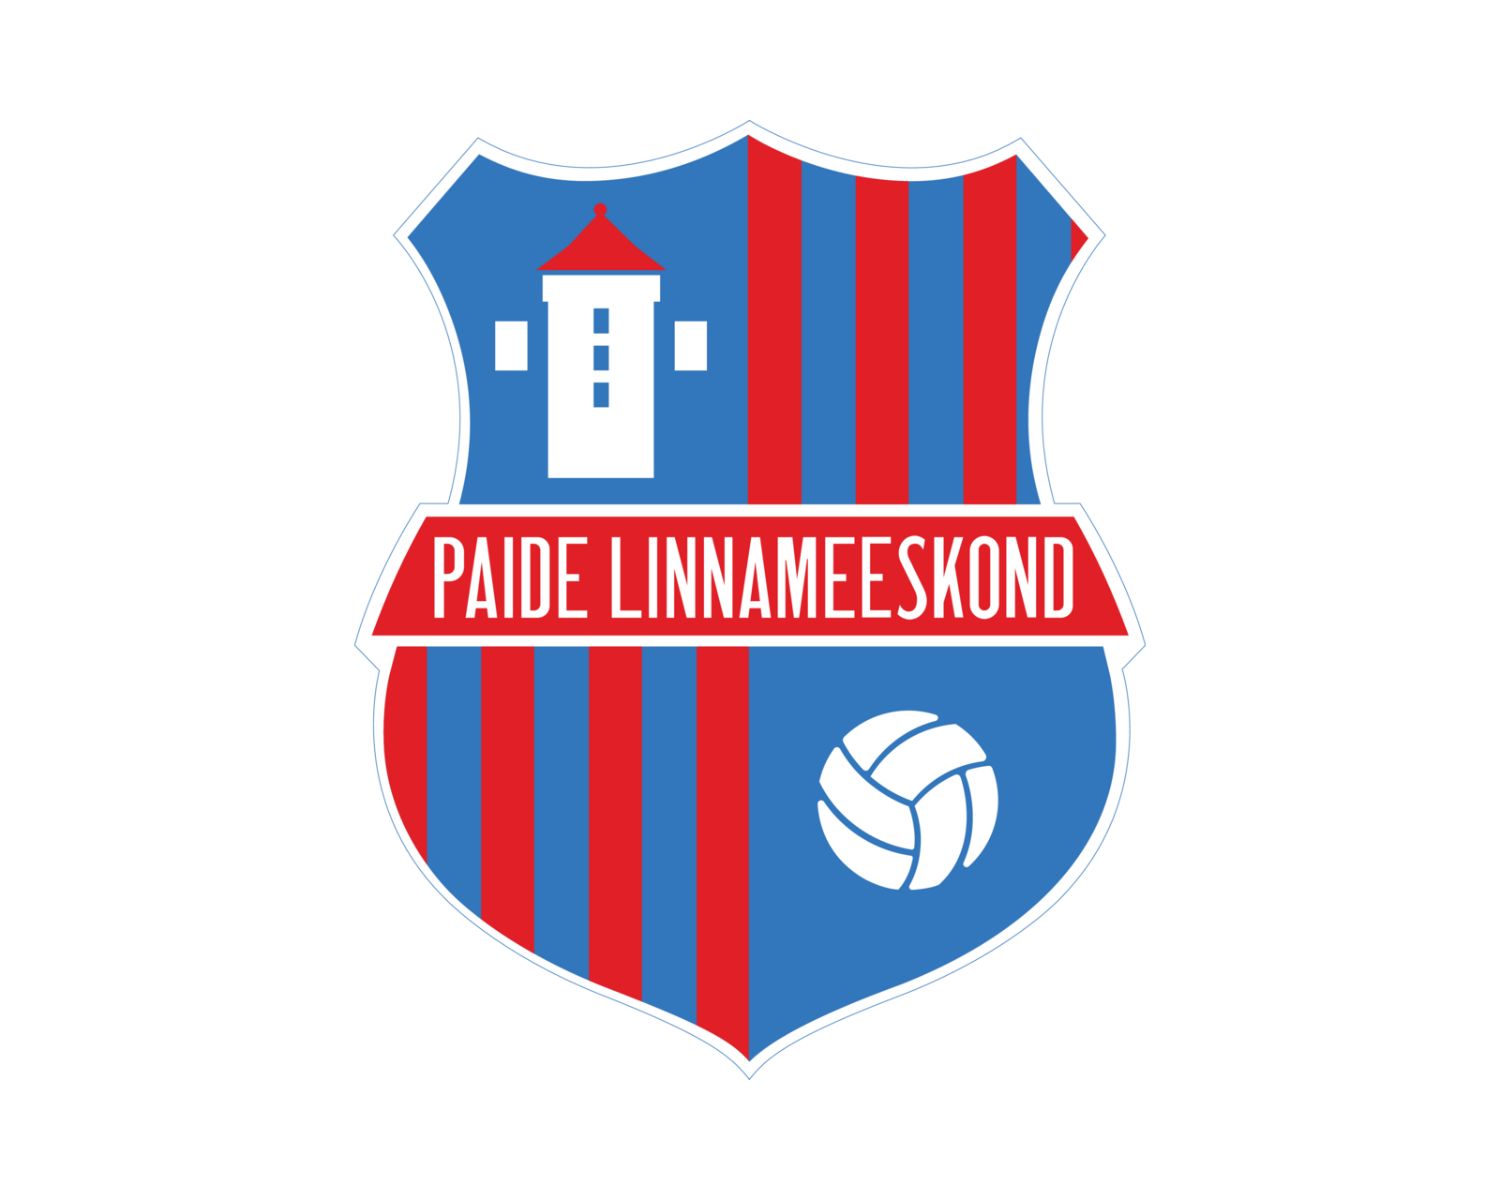 paide-linnameeskond-12-football-club-facts